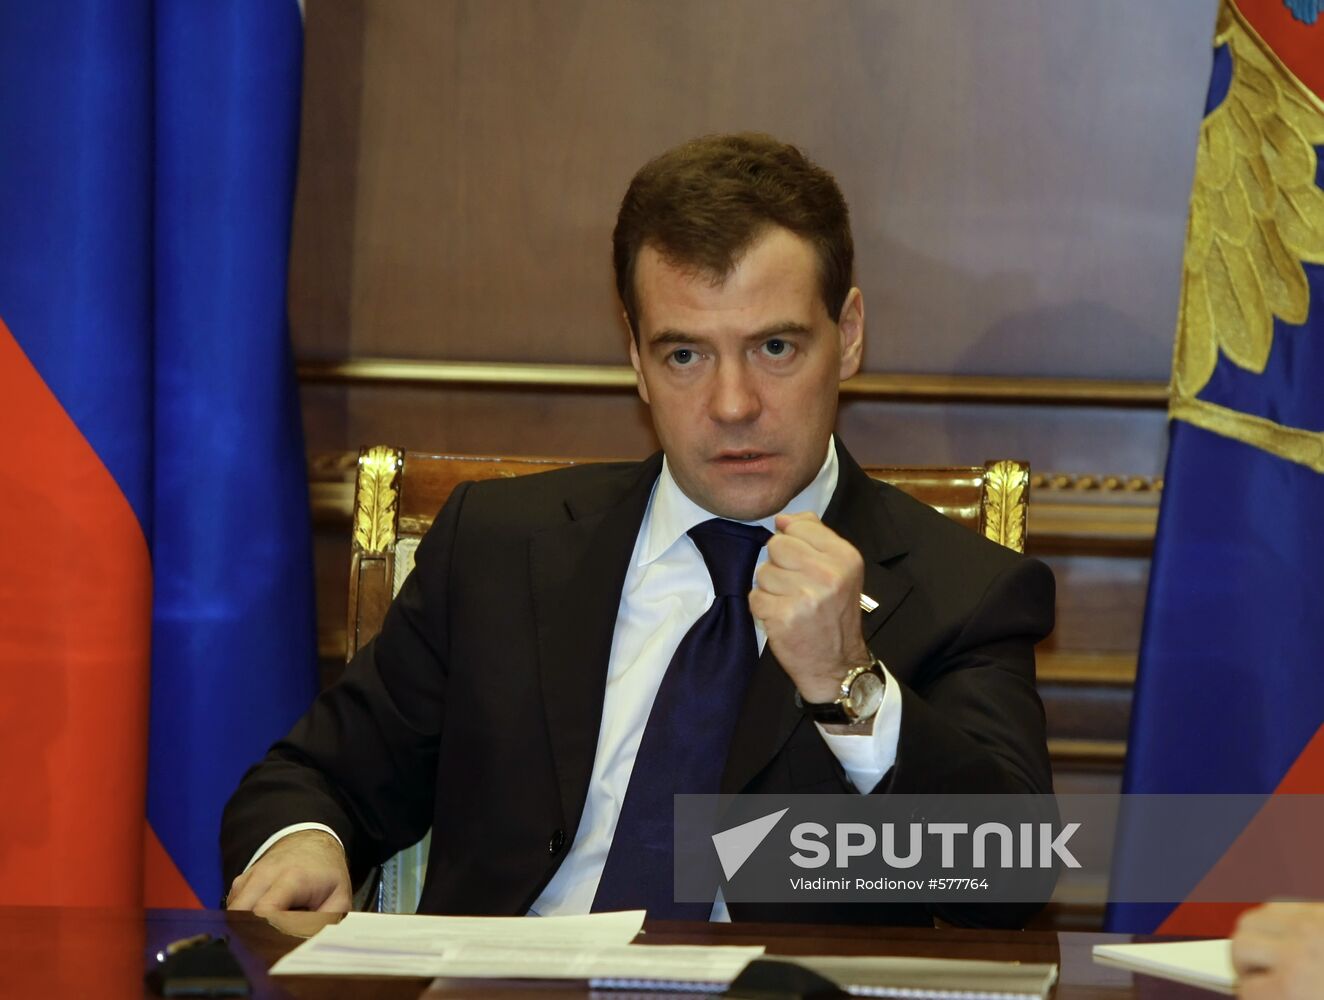 Dmitry Medvedev chairs meeting on climate change